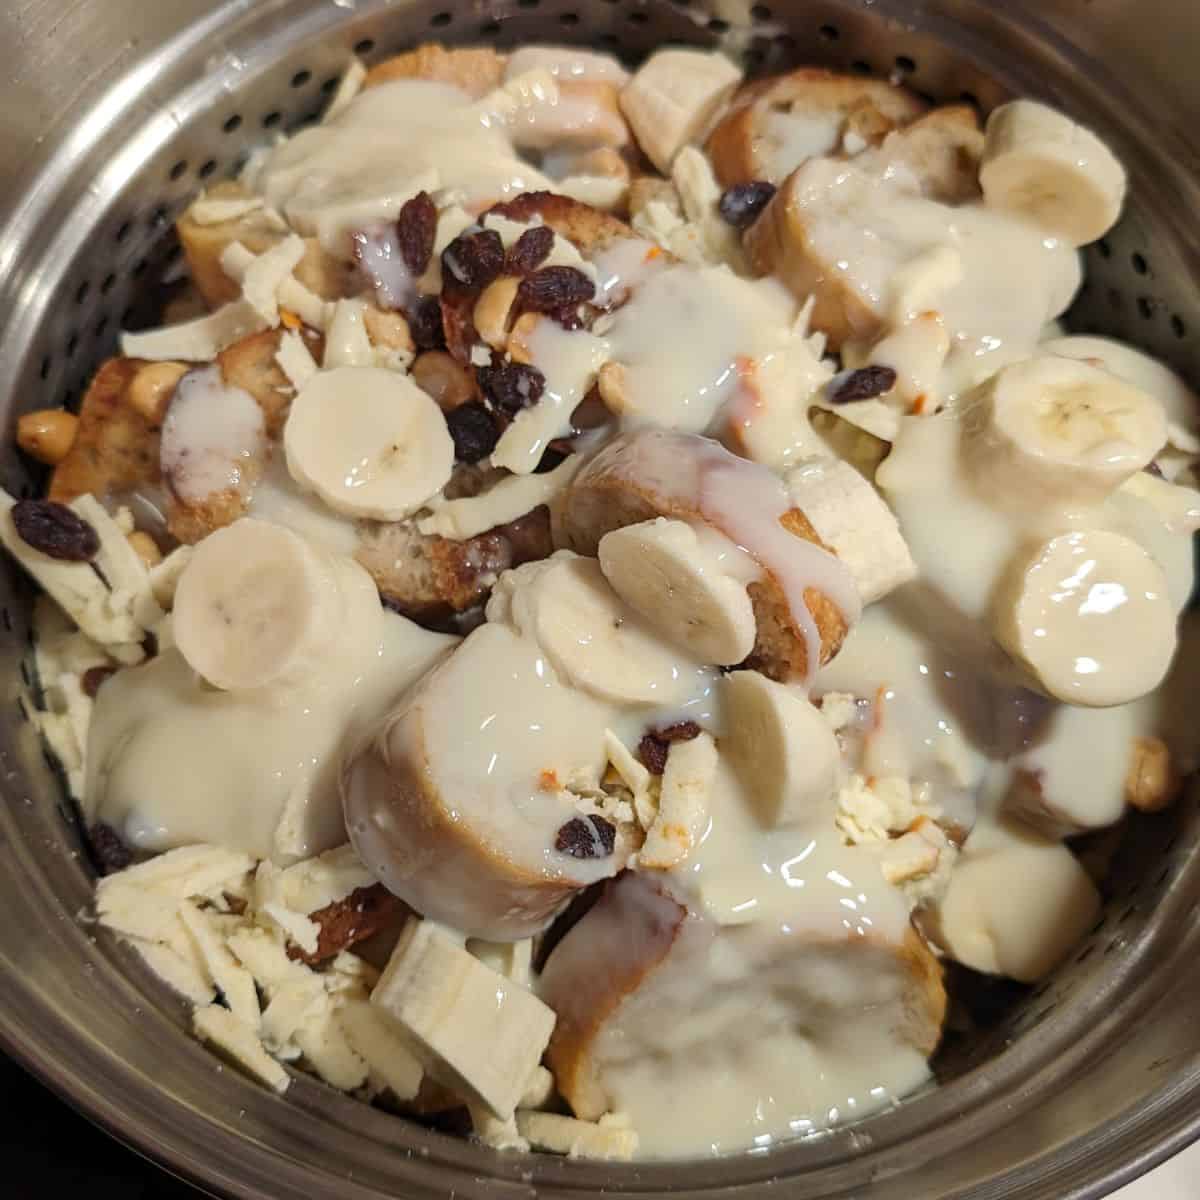 Uncooked capirotada in a pot, topped with sweetened condensed milk, banana slices, raisins, and peanuts.